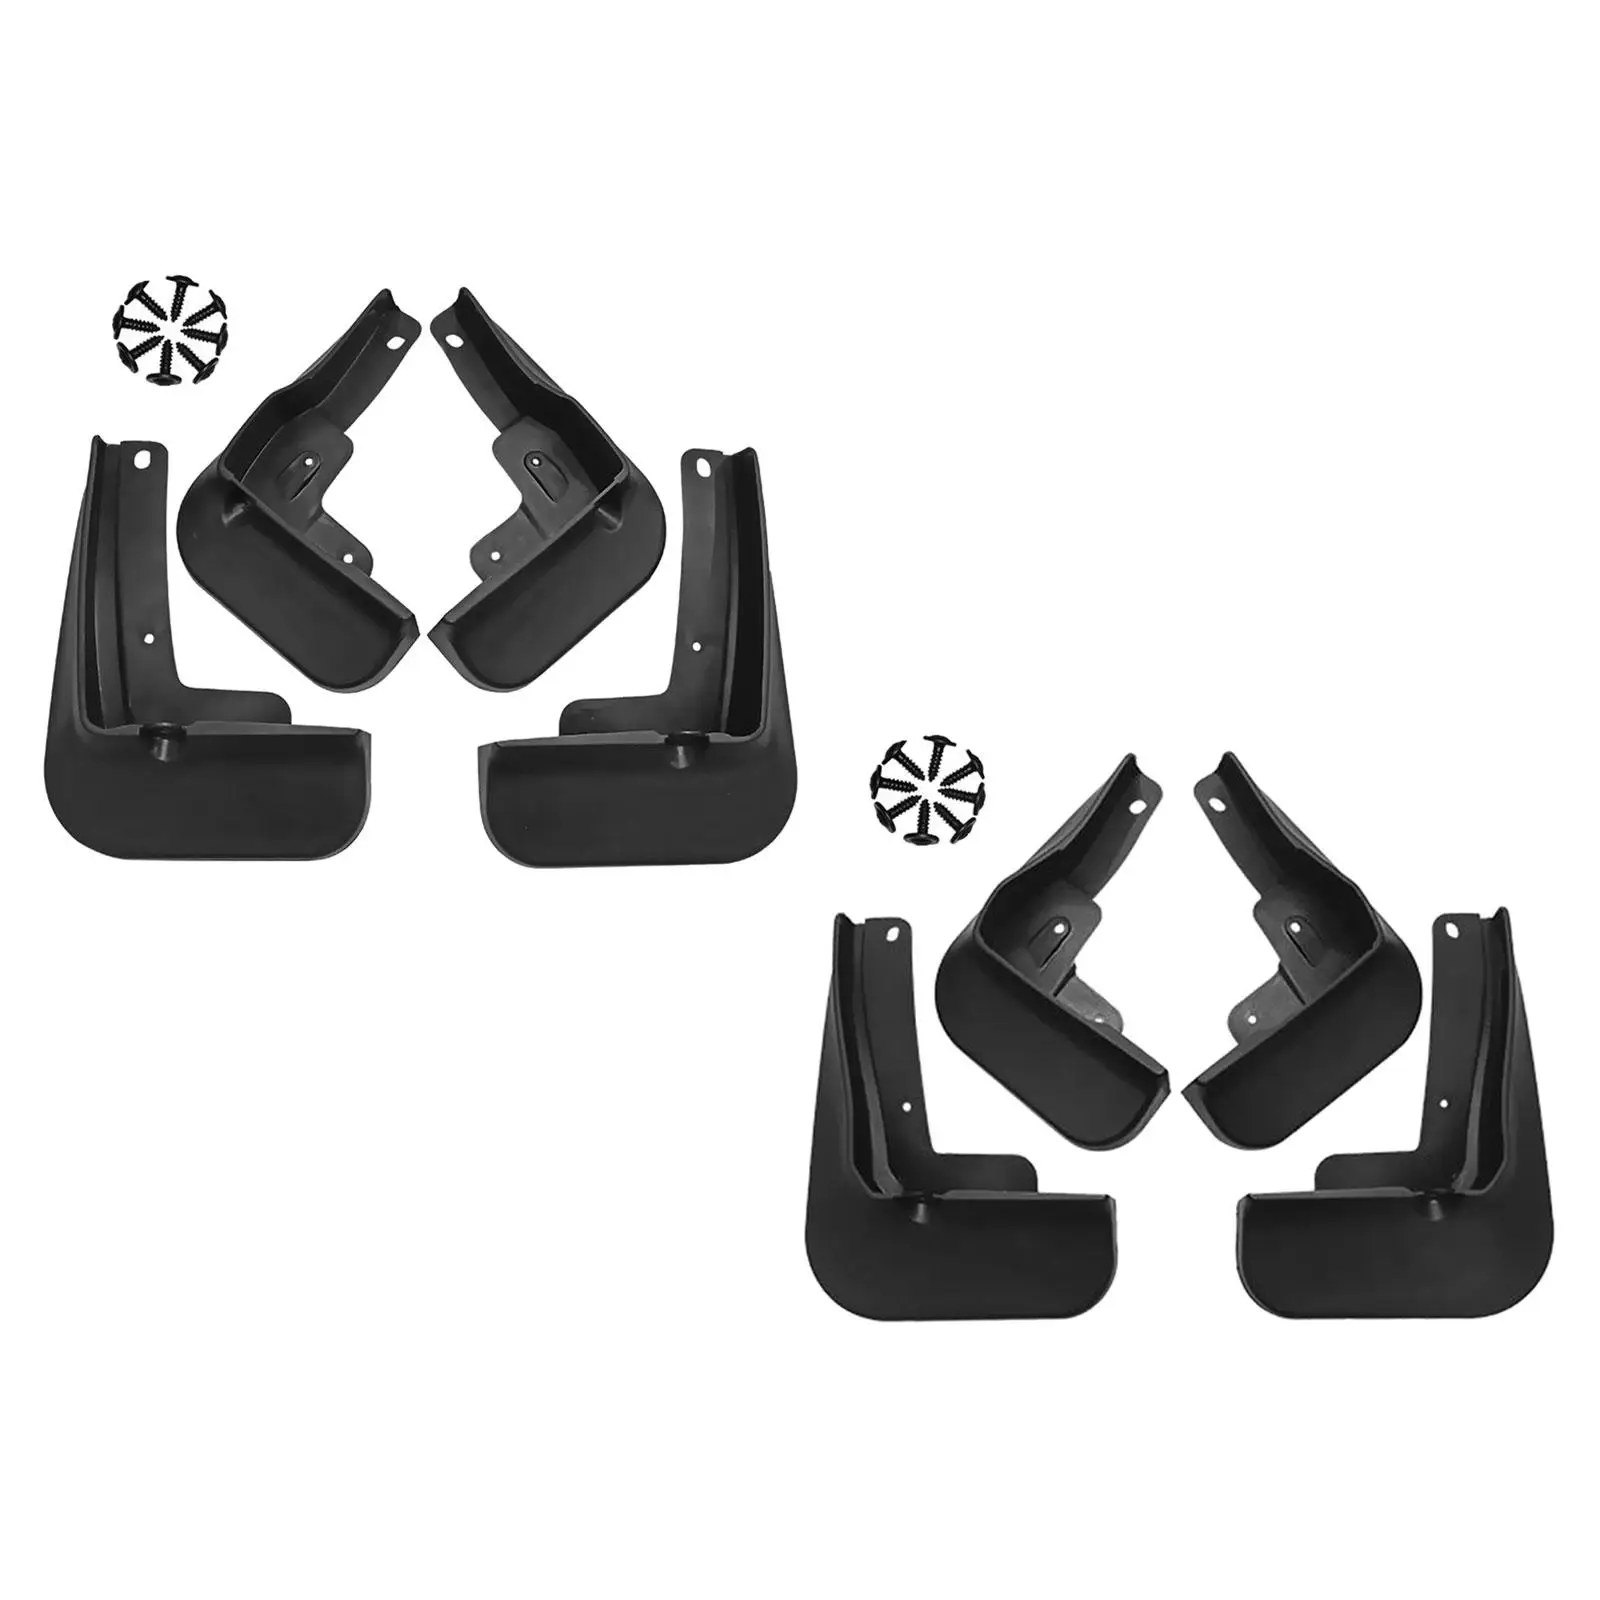 4Pcs Front and Rear Mud Flaps Mudflaps for Toyota for camry Accessories